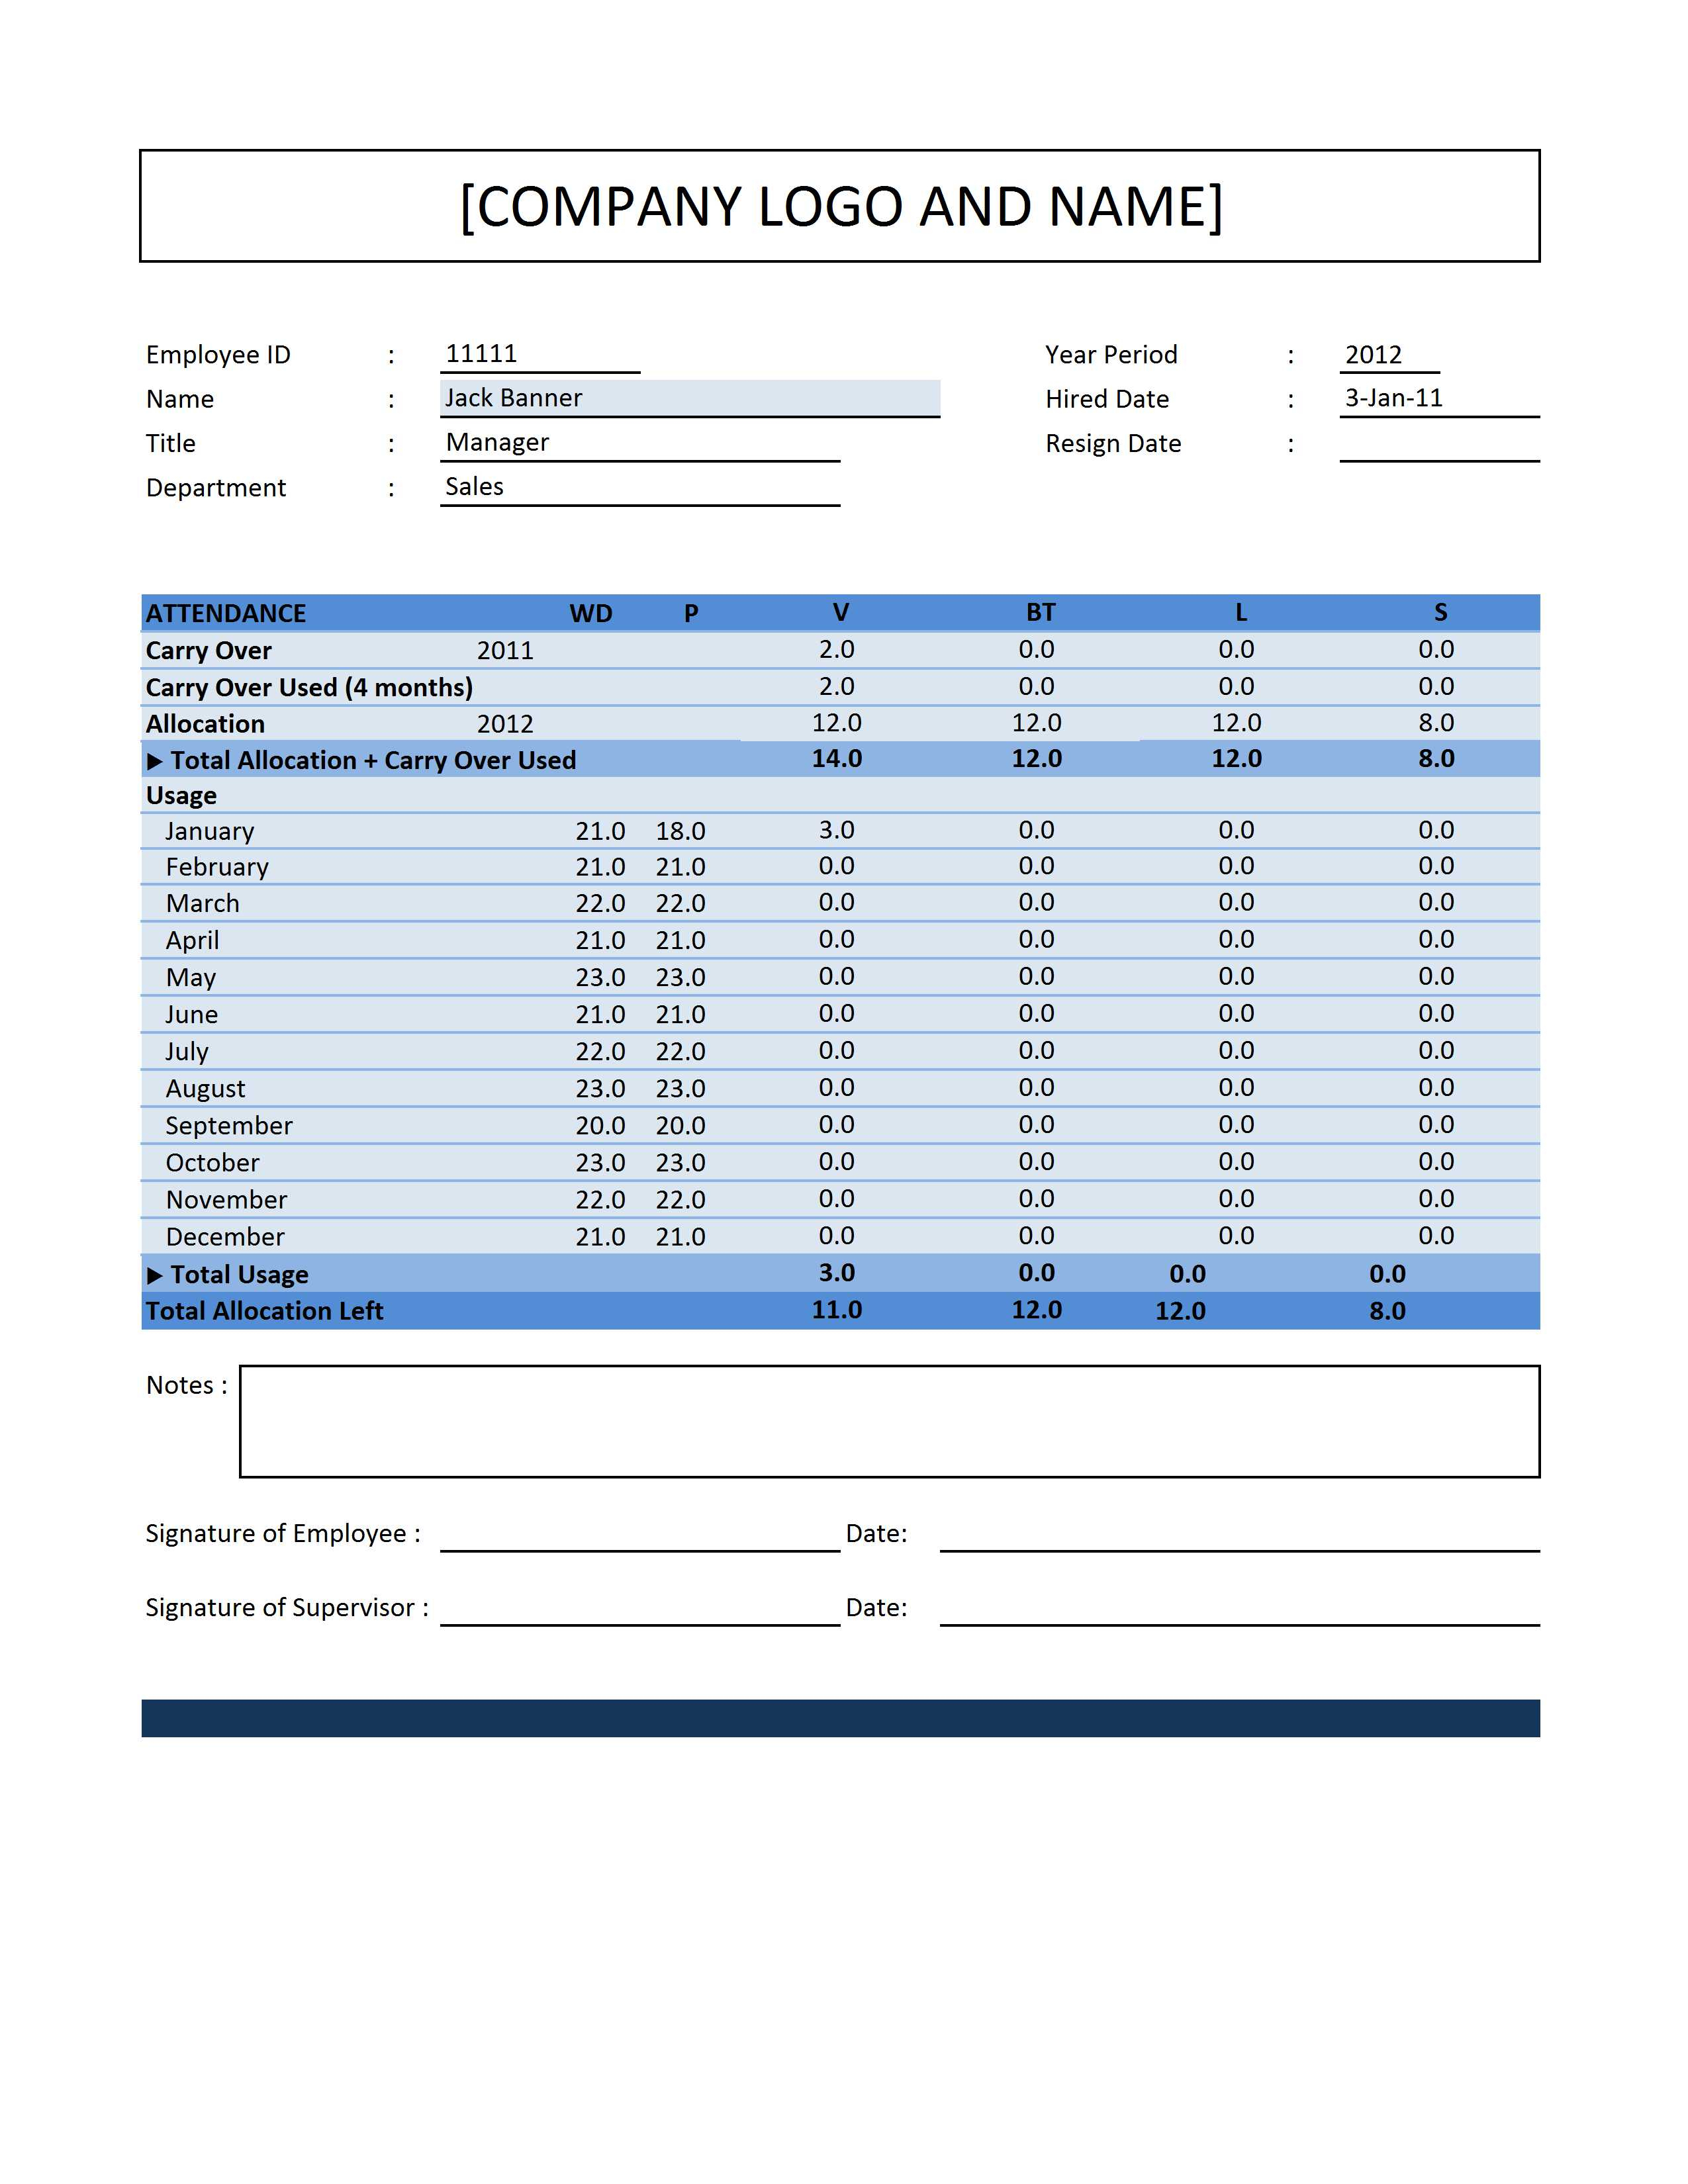 Employee Point System Spreadsheet Inside Top 3 Spreadsheets To Manage Your Employee's Attendance – Excel